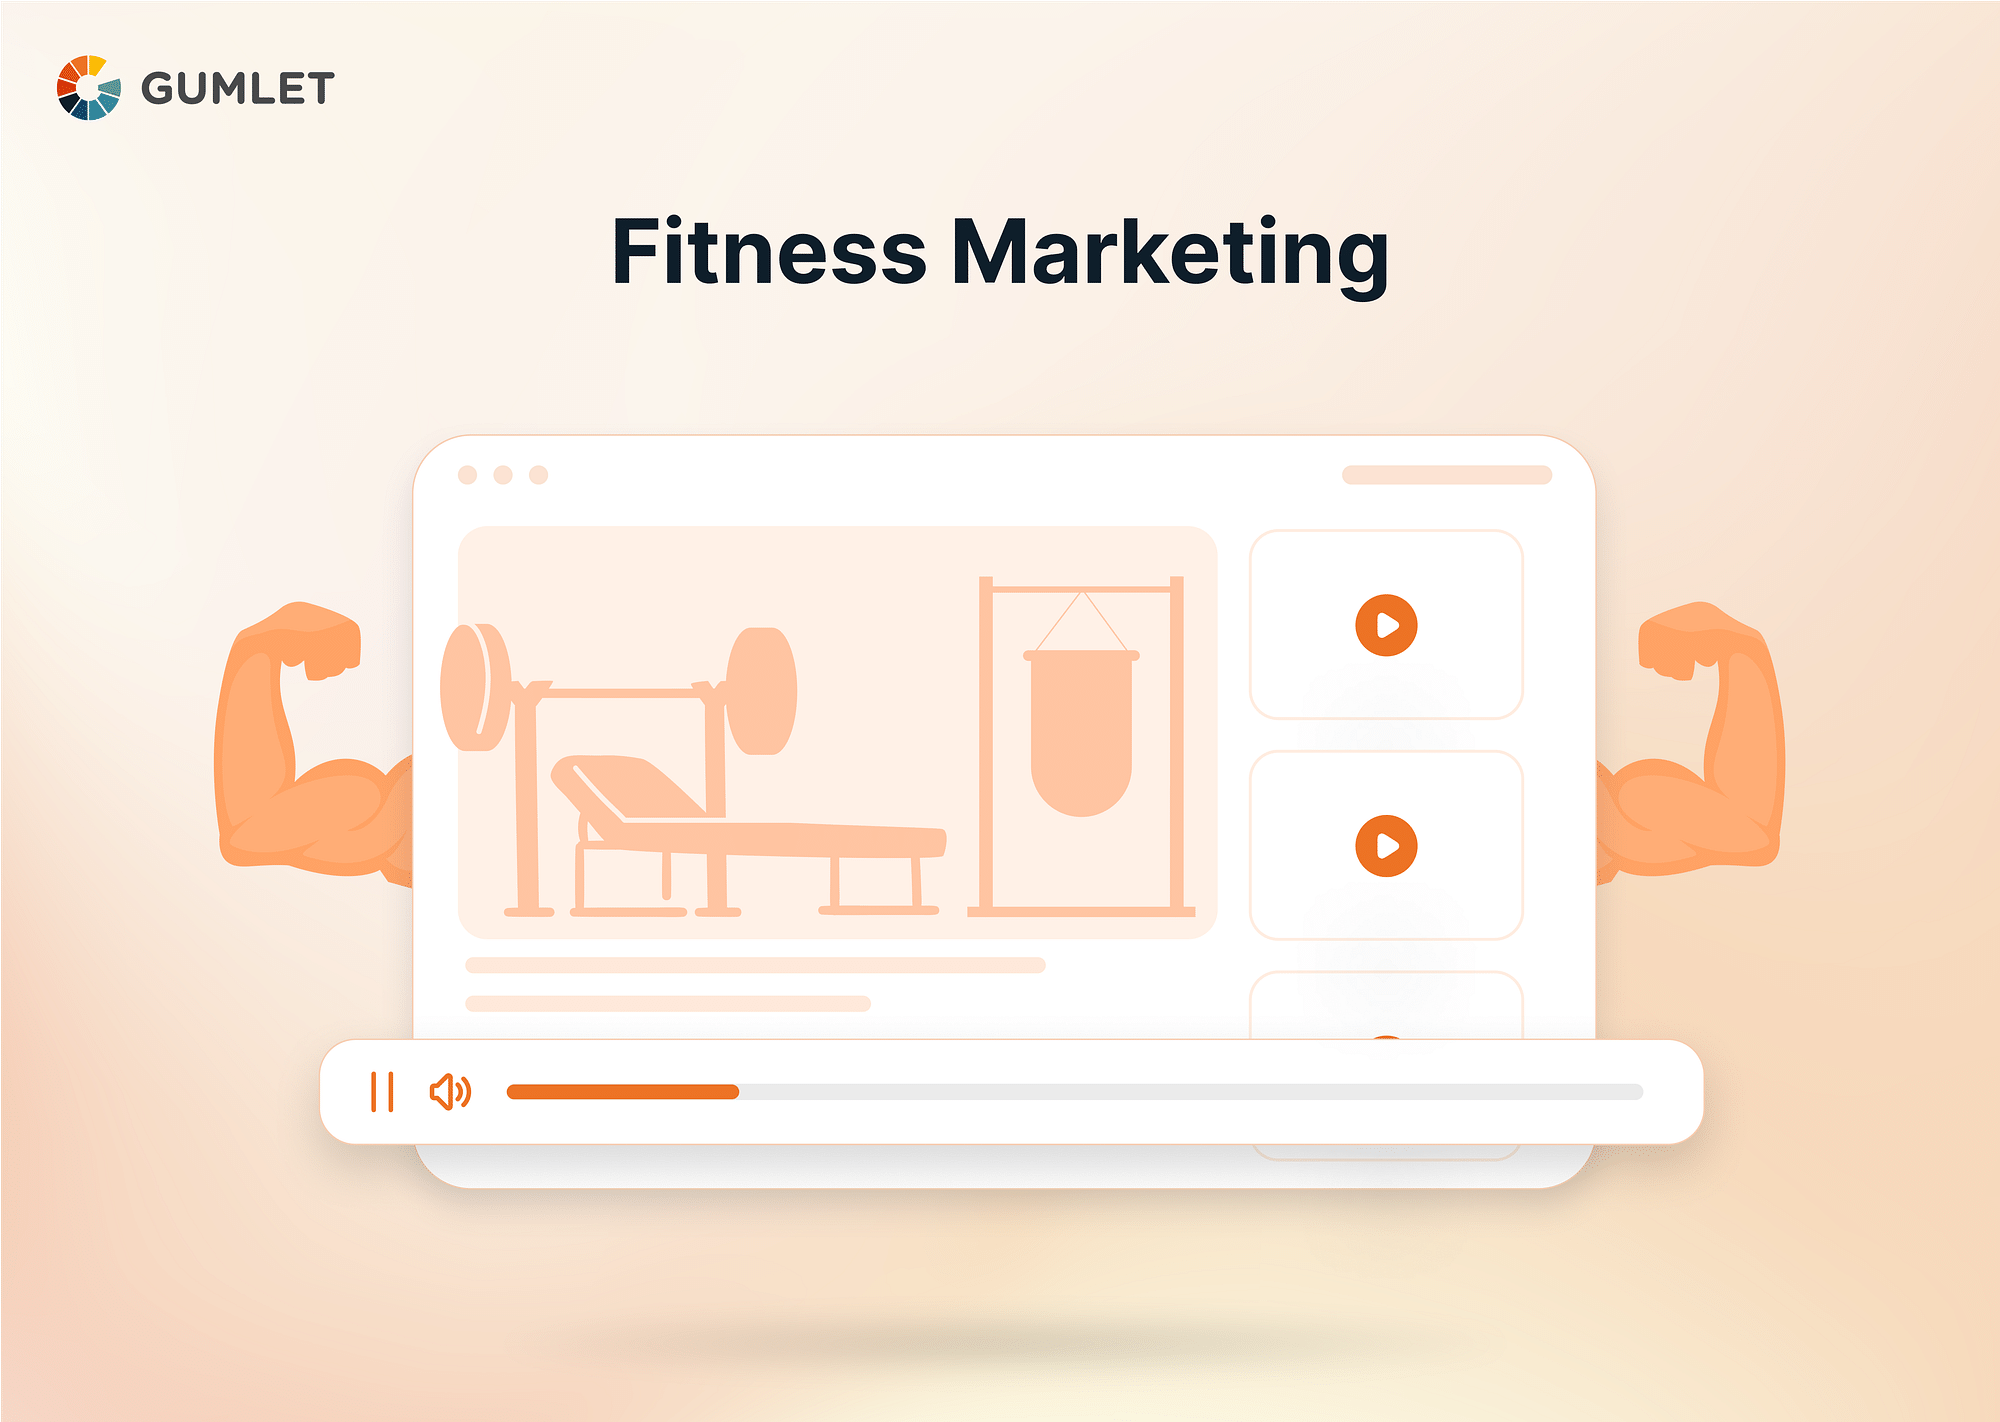 How to Ace Your Online Fitness Marketing Strategy?